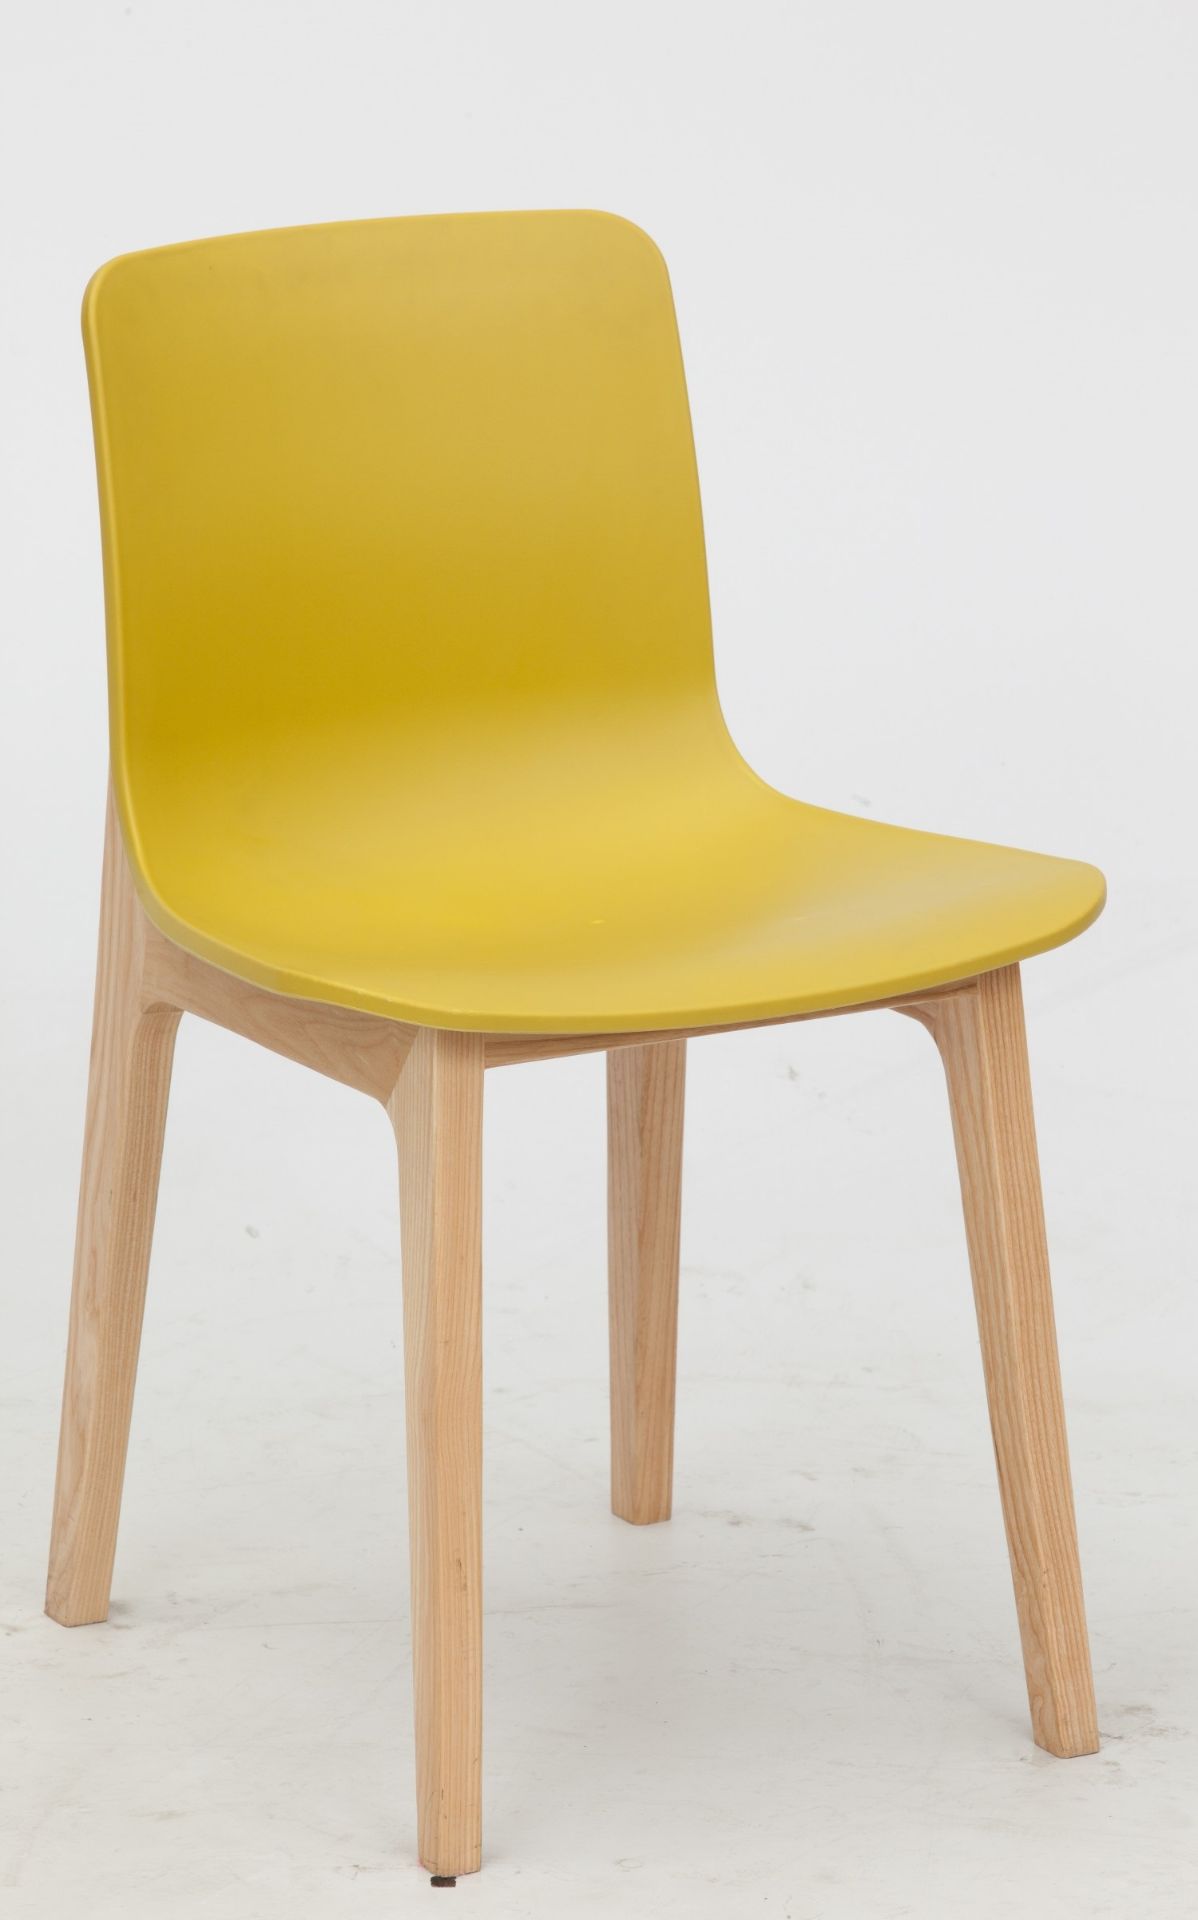 Set of 6 x Swift DC-782W Dining Chairs With Chartreuse ABS Seats and Natural Wood Bases - RRP £540! - Image 2 of 5